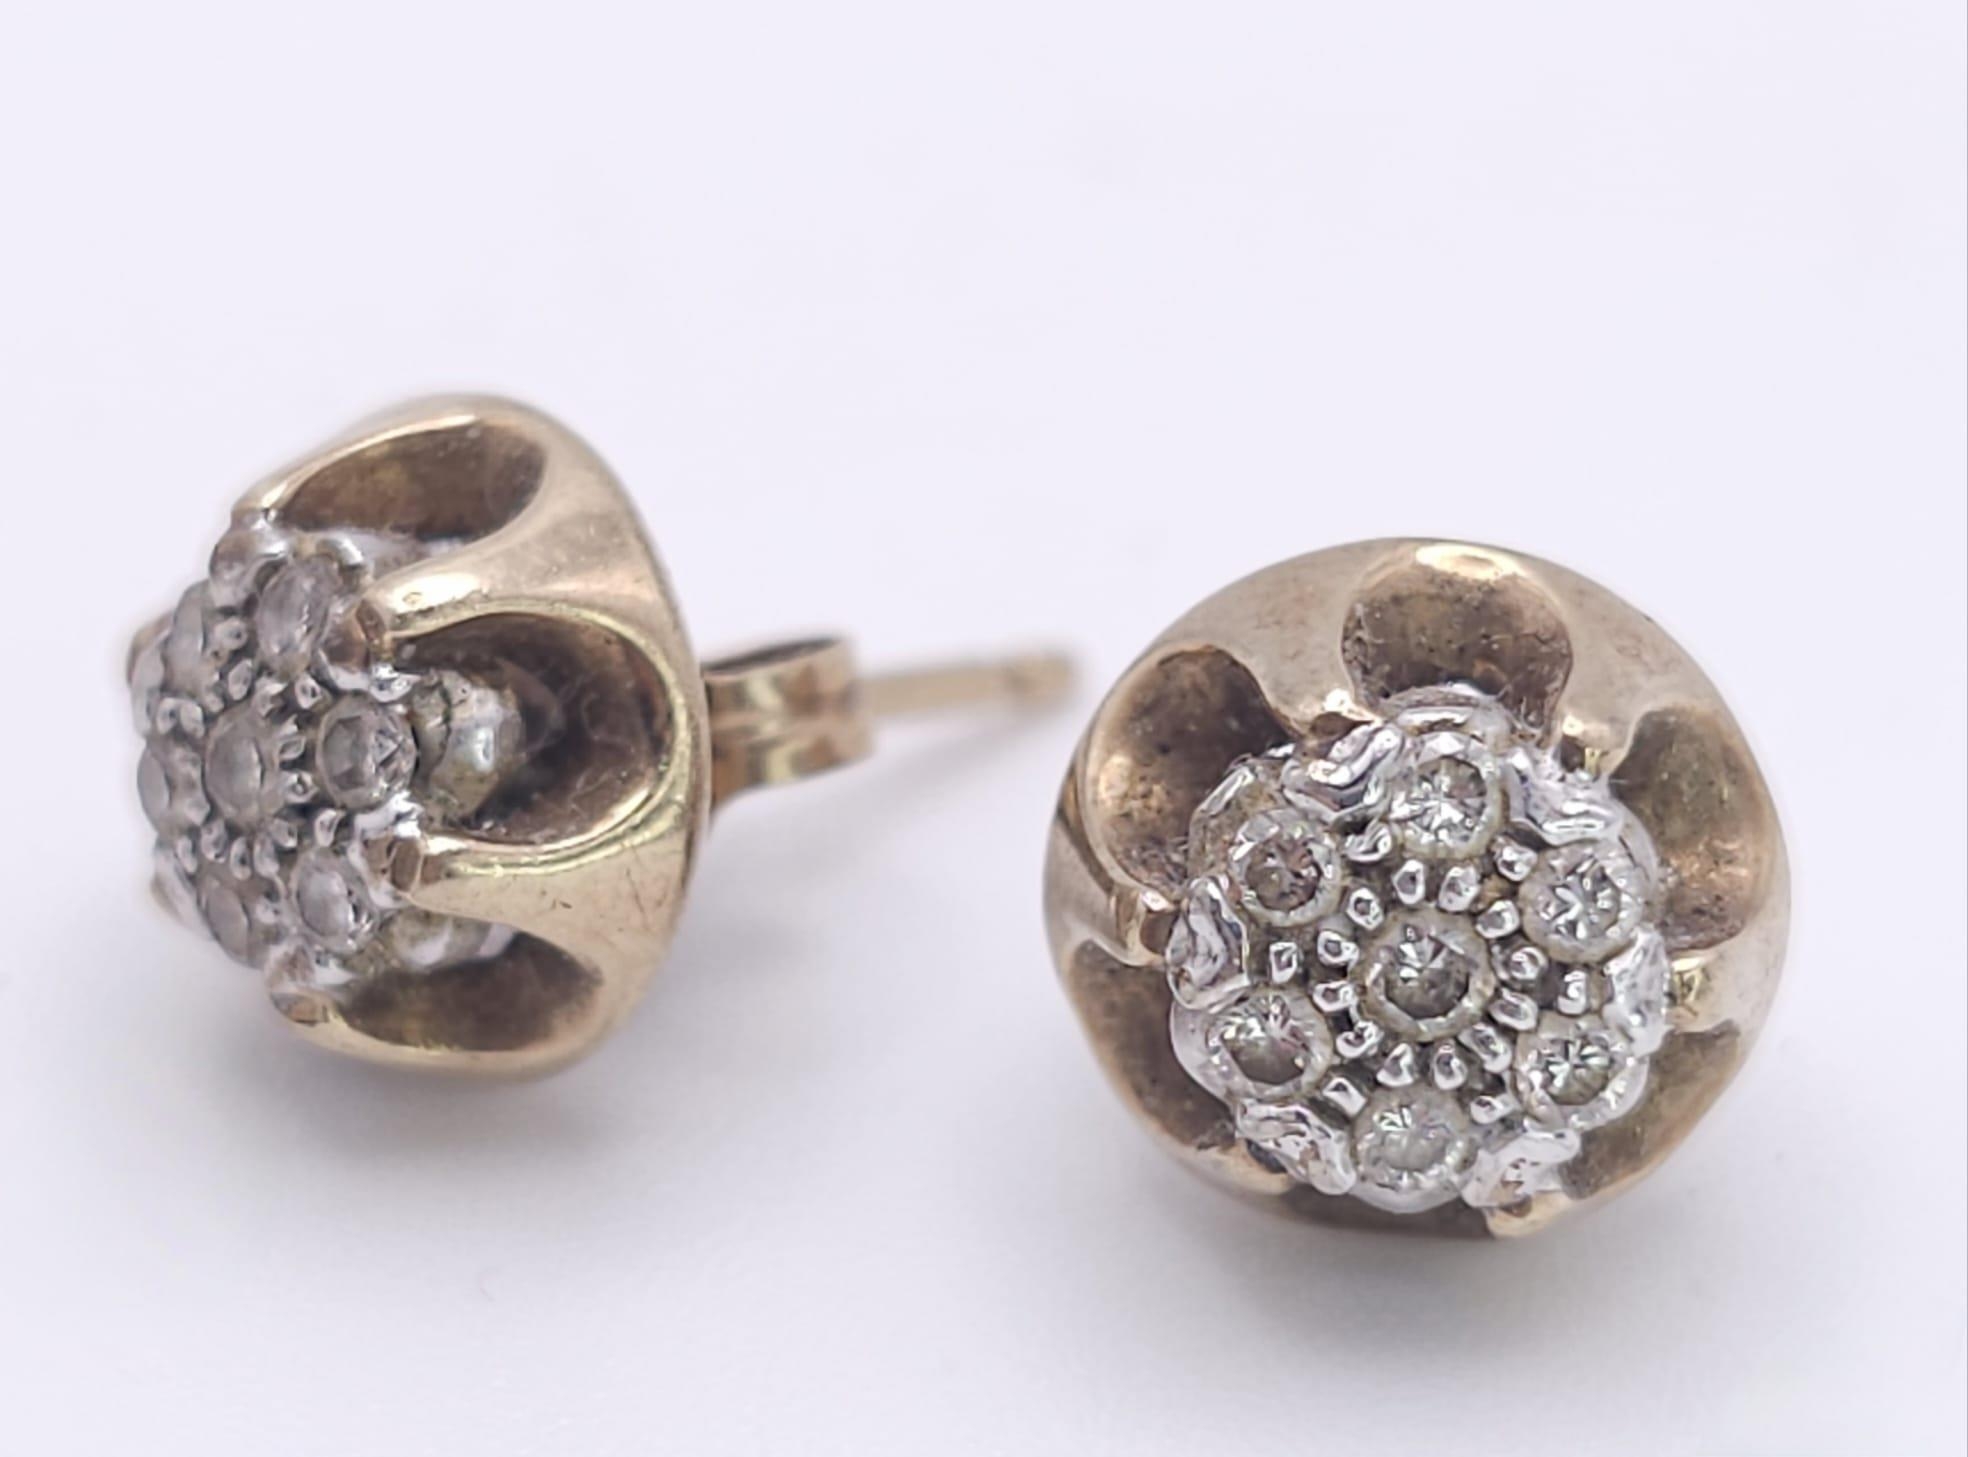 A Pair of Vintage 9K Yellow Gold and Diamond Stud Earrings. 3.3g total weight. - Image 2 of 10